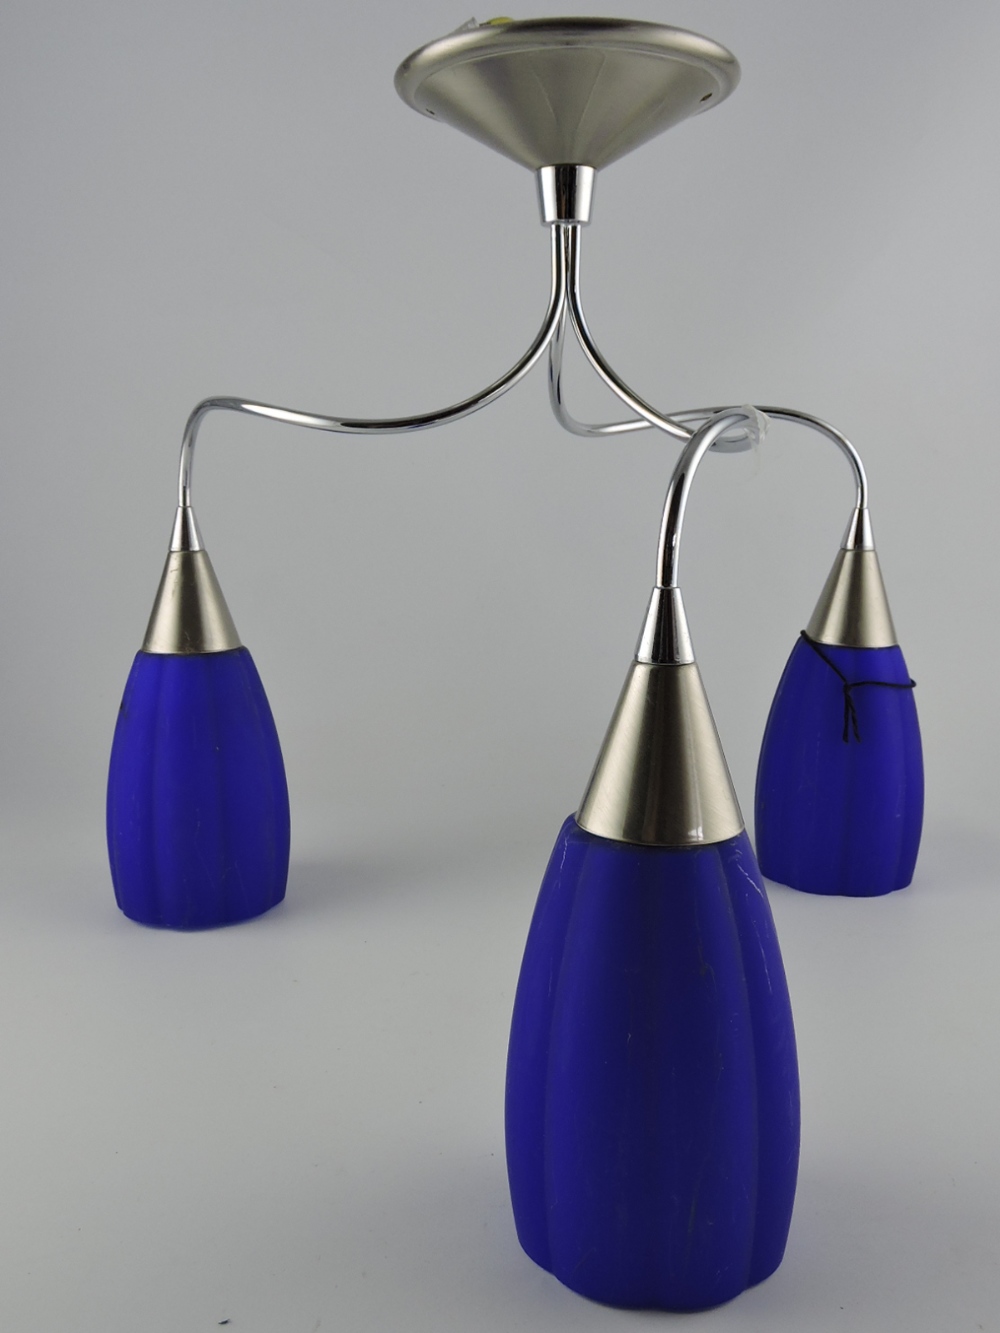 A modern chrome and blue glass three branch ceiling light.